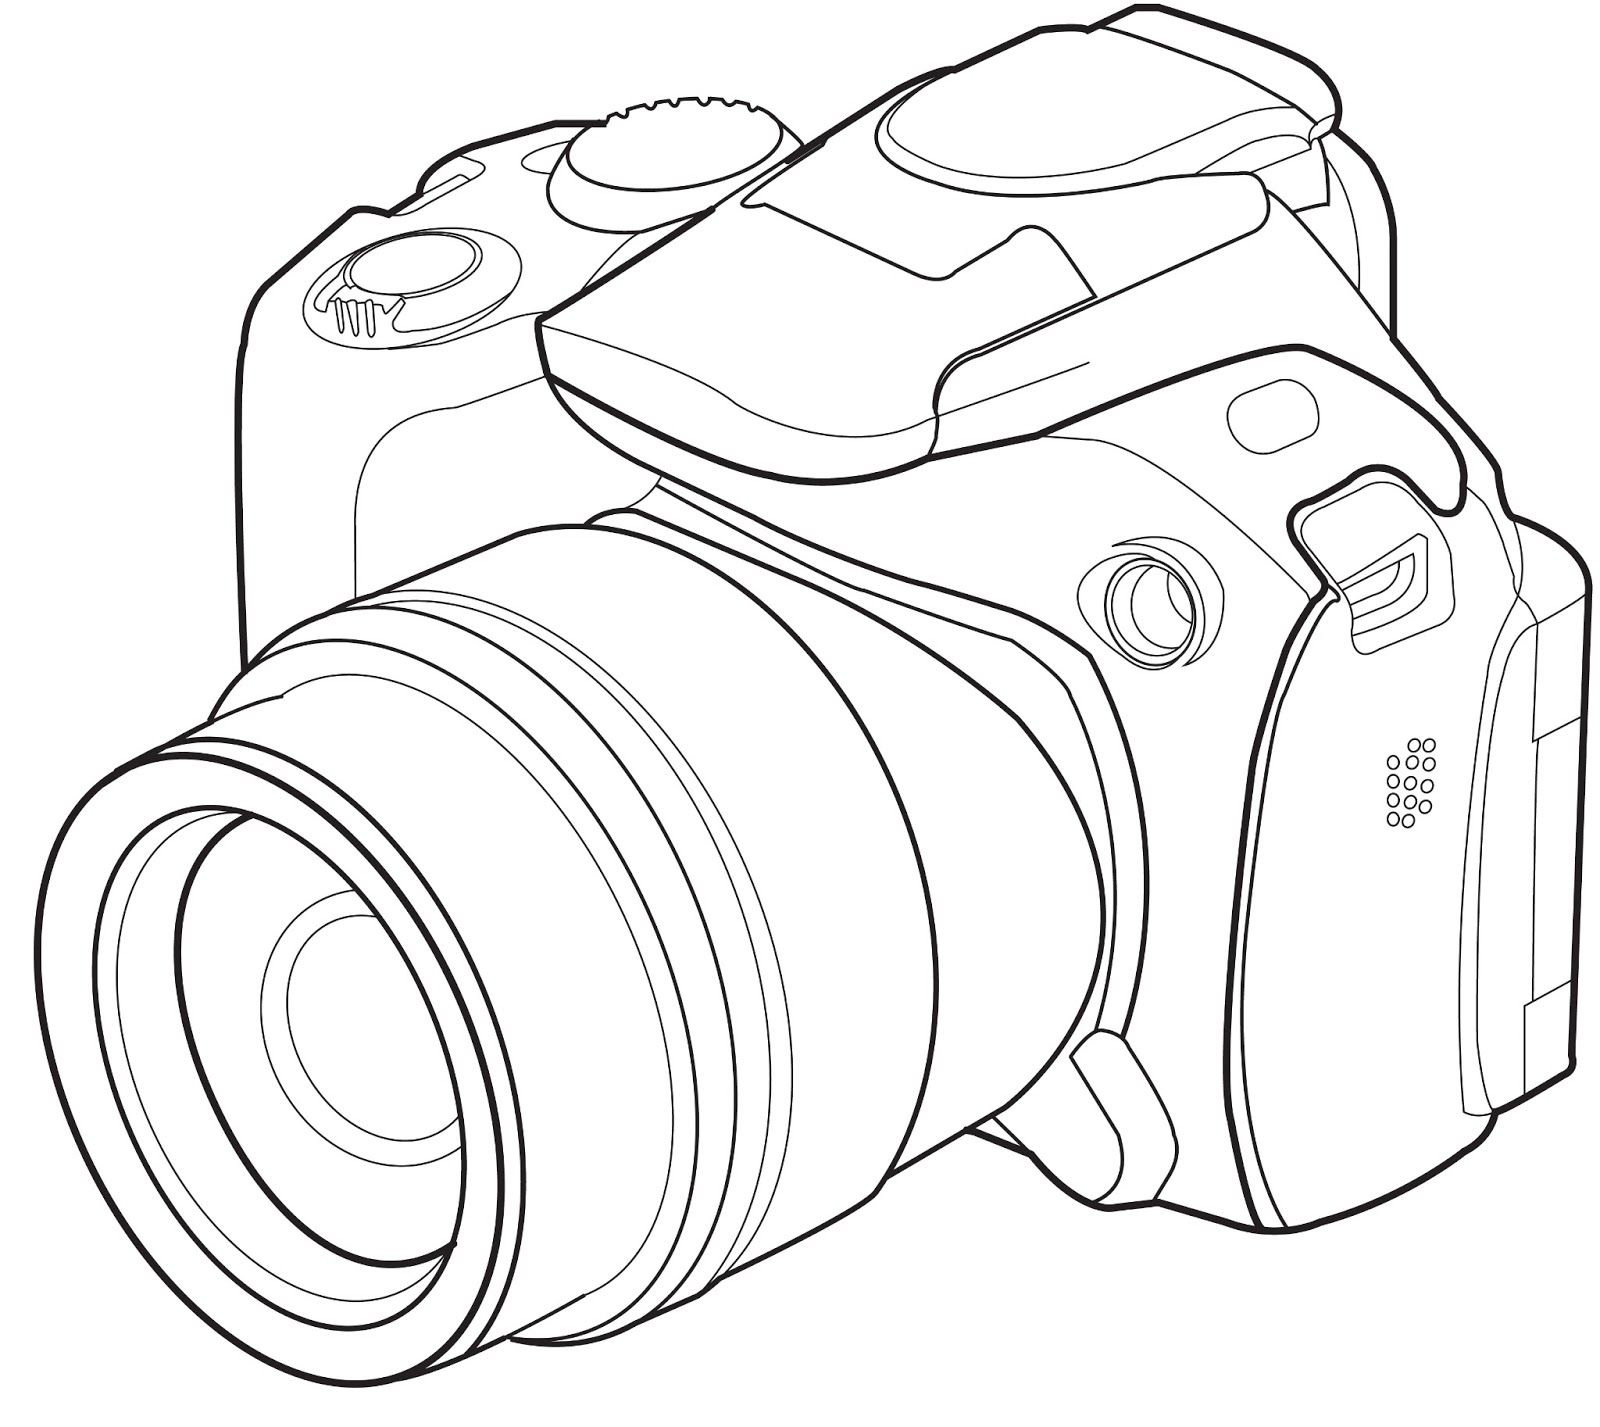 Animal Sketch Camera Drawing for Adult